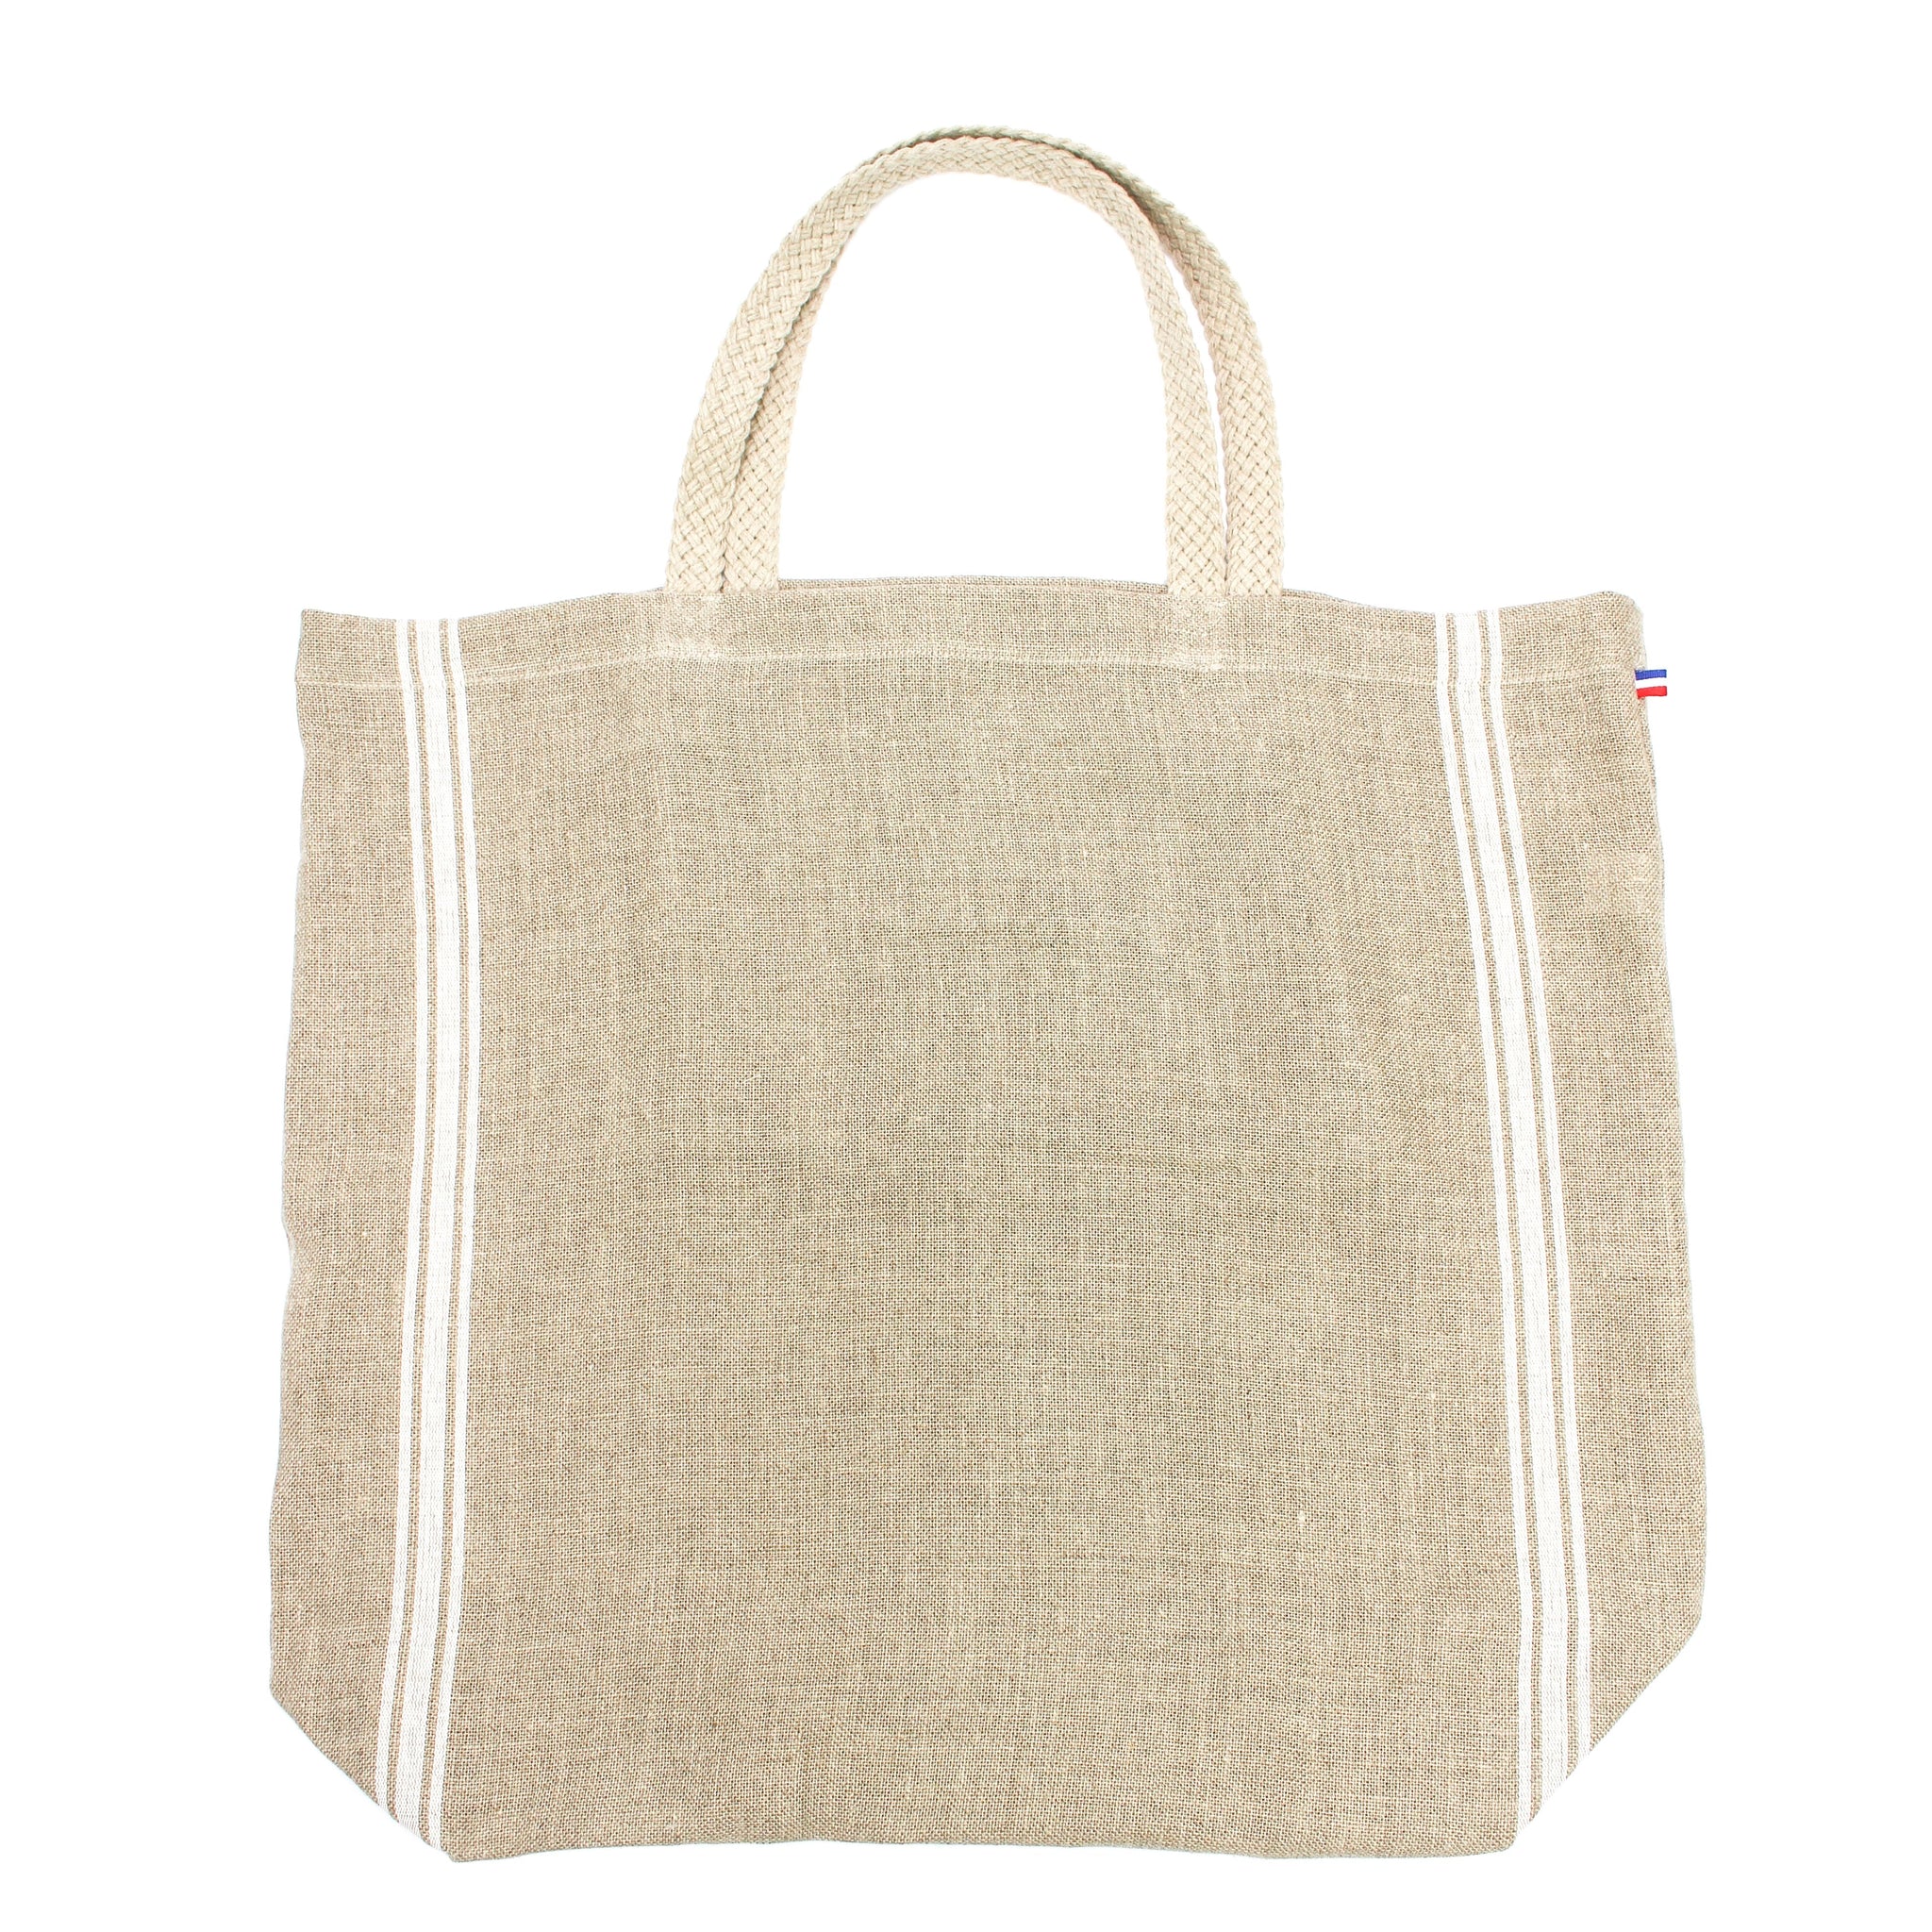 Monogramme White Thieffry Linen Beach Tote with Braided Handle and Inner Zipper Pocket - French Dry Goods